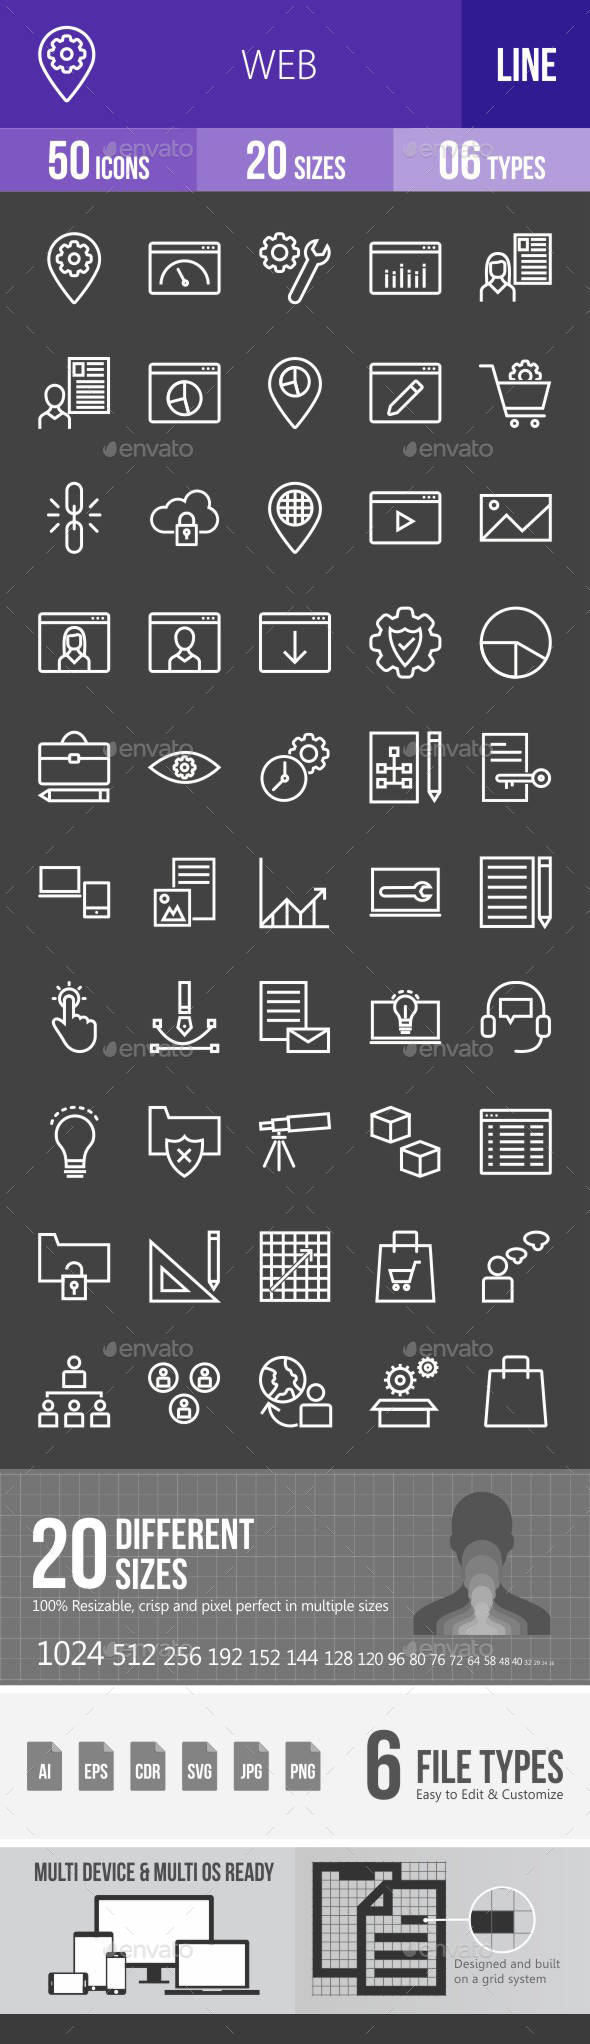 Web Line Inverted Icons